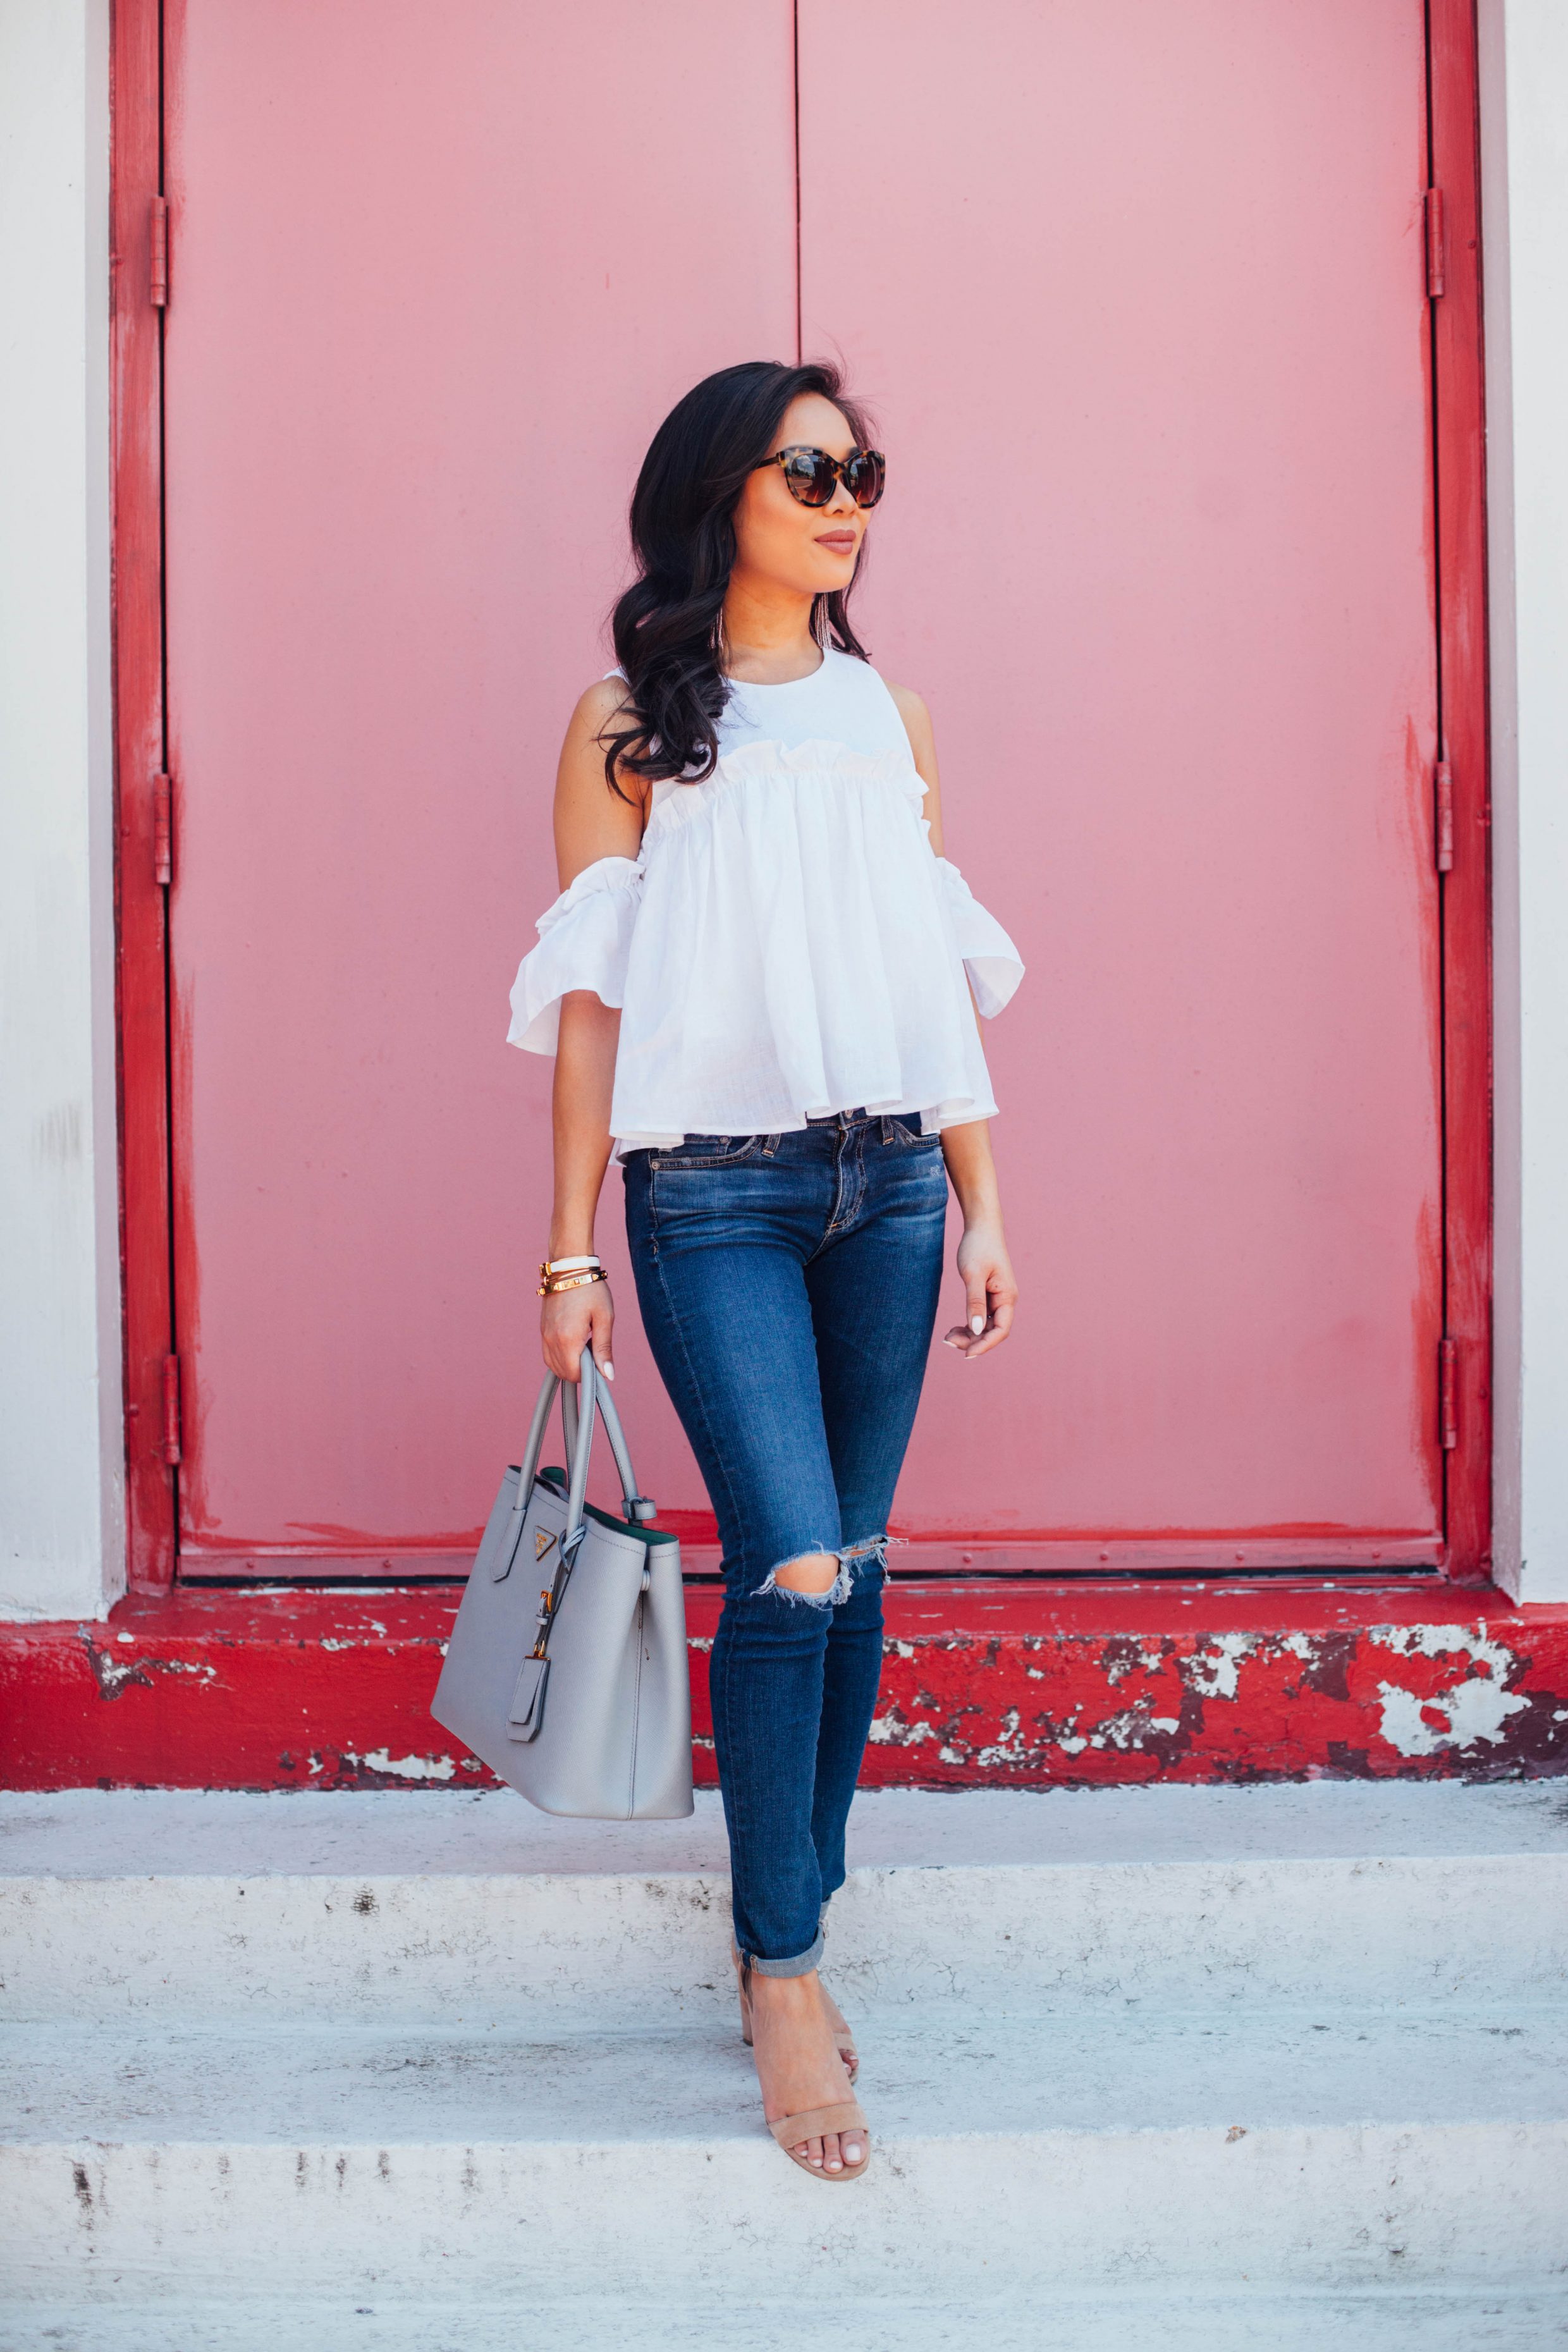 Blogger Hoang-Kim wears a layered ruffle cold shoulder top with distressed jeans